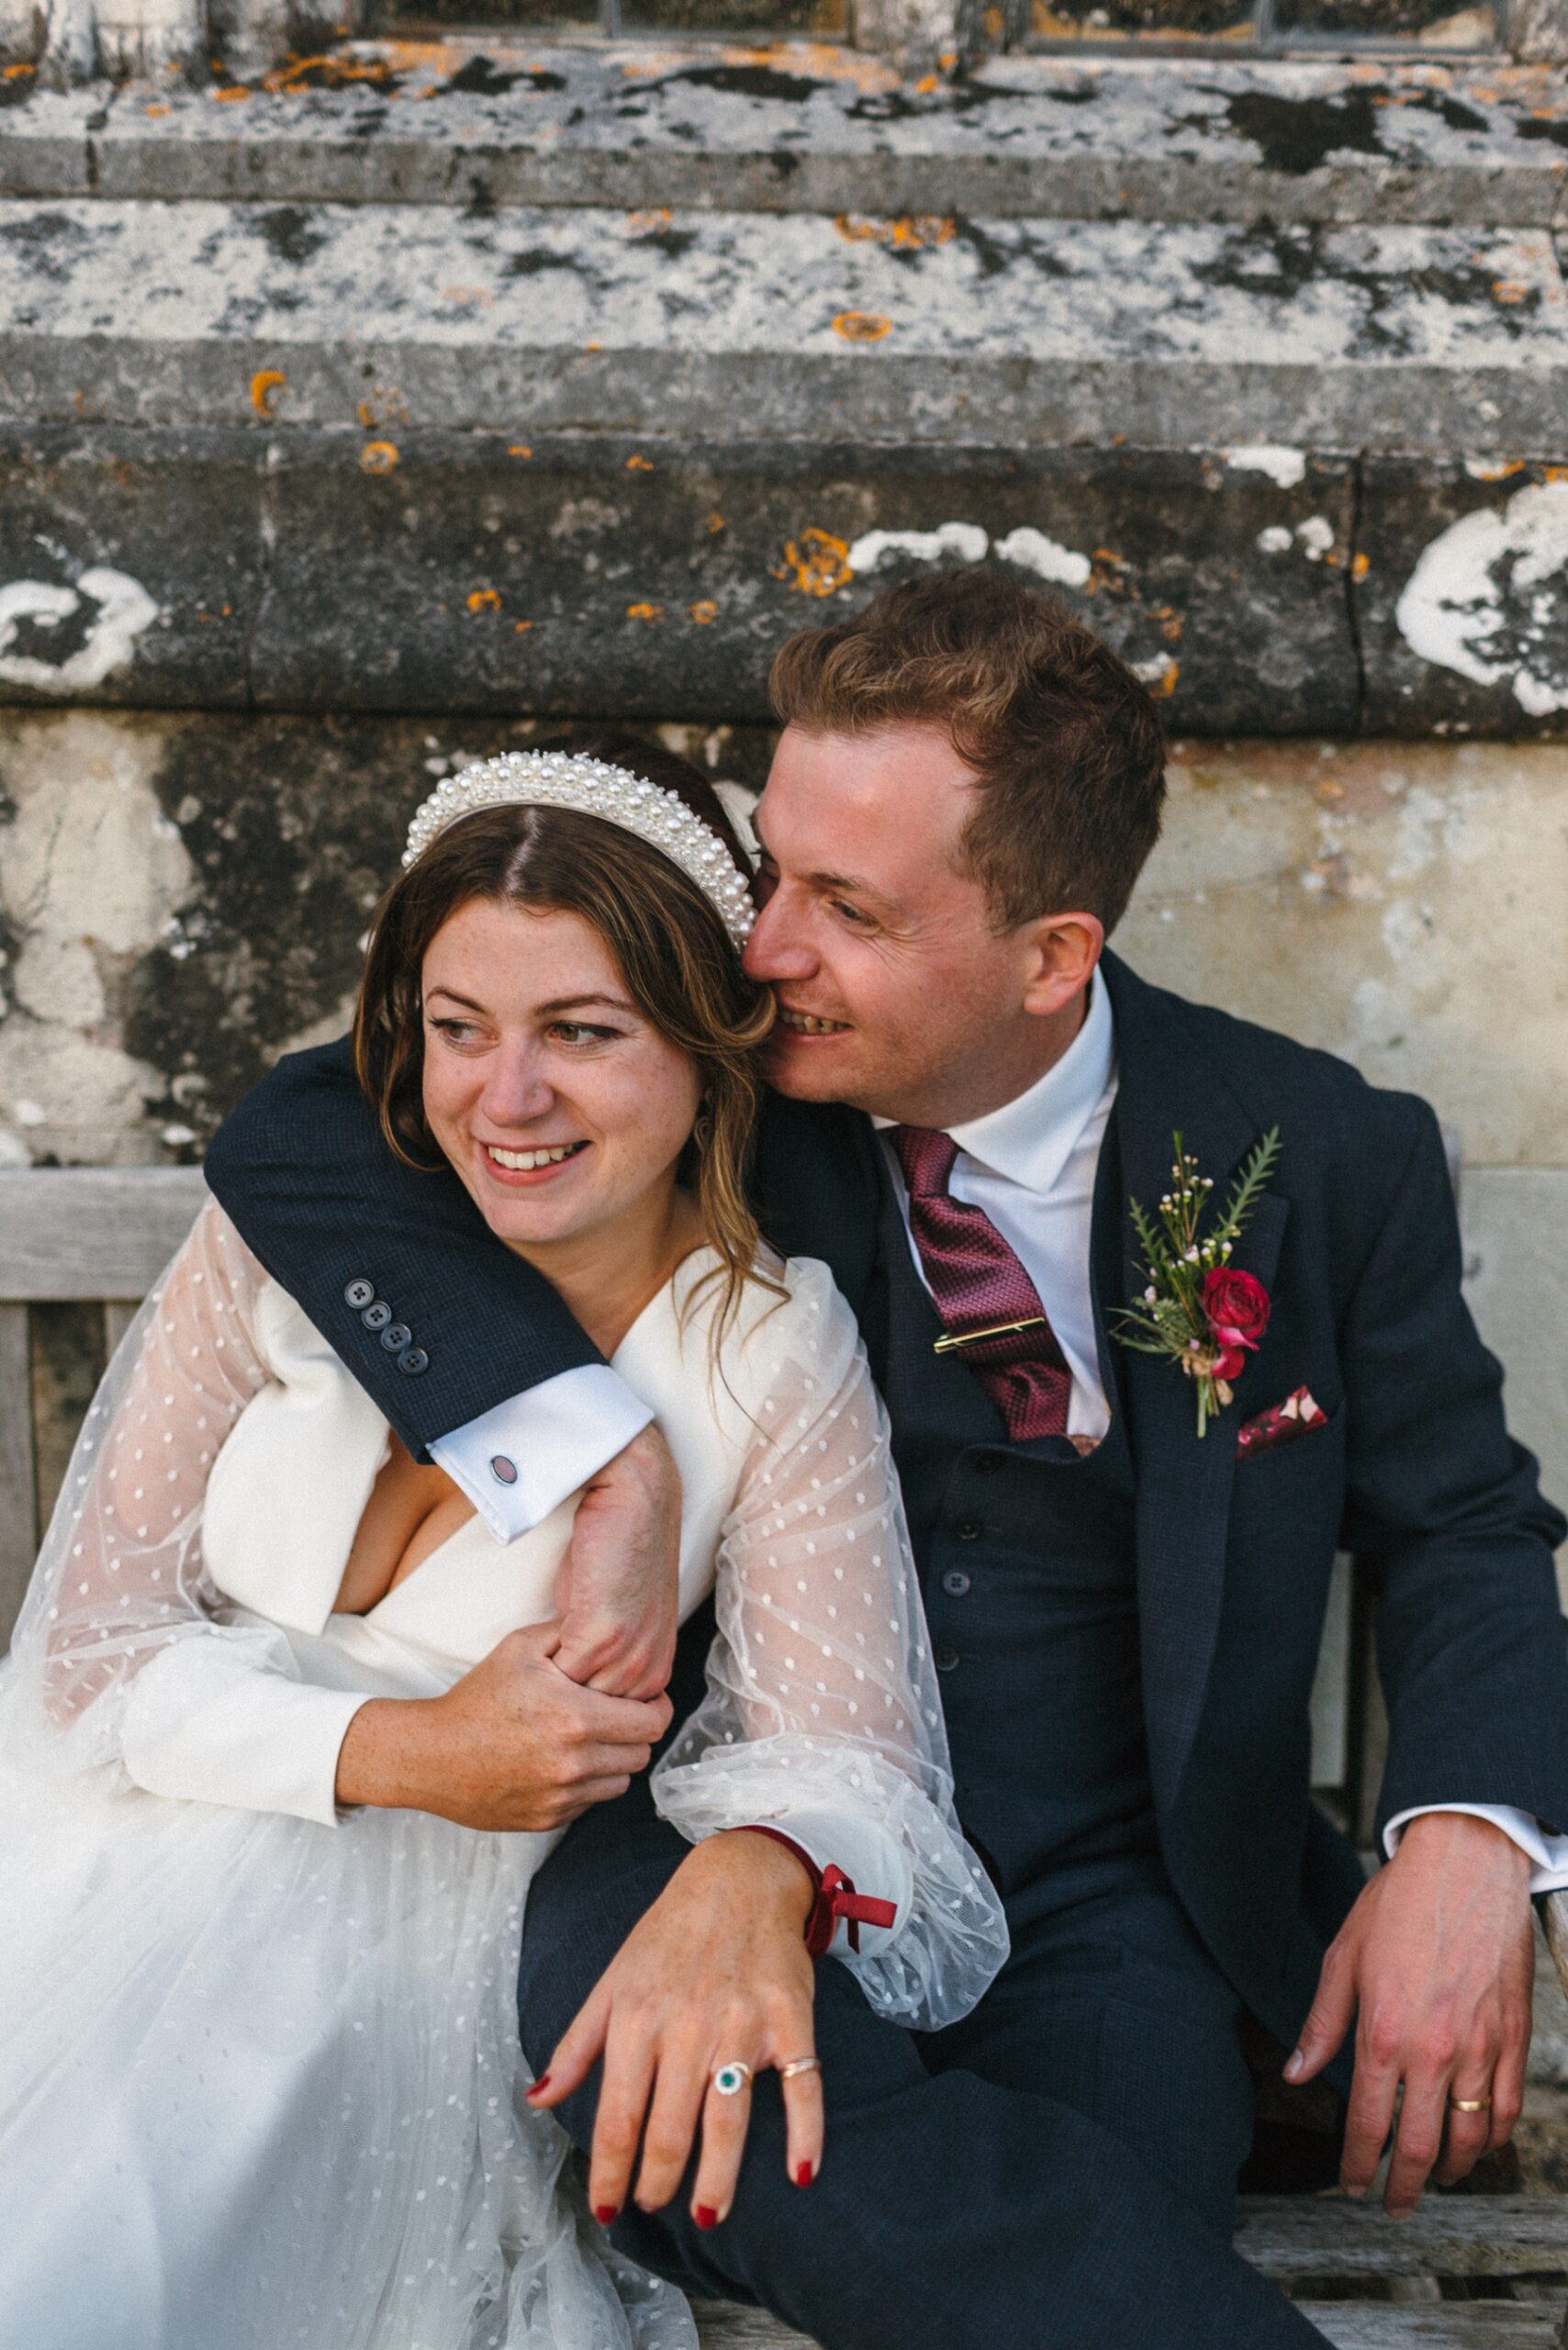 Relaxed and colourful wedding photography at Trelowarren estate in Cornwall_Wedding Photographer Devon & Cornwall